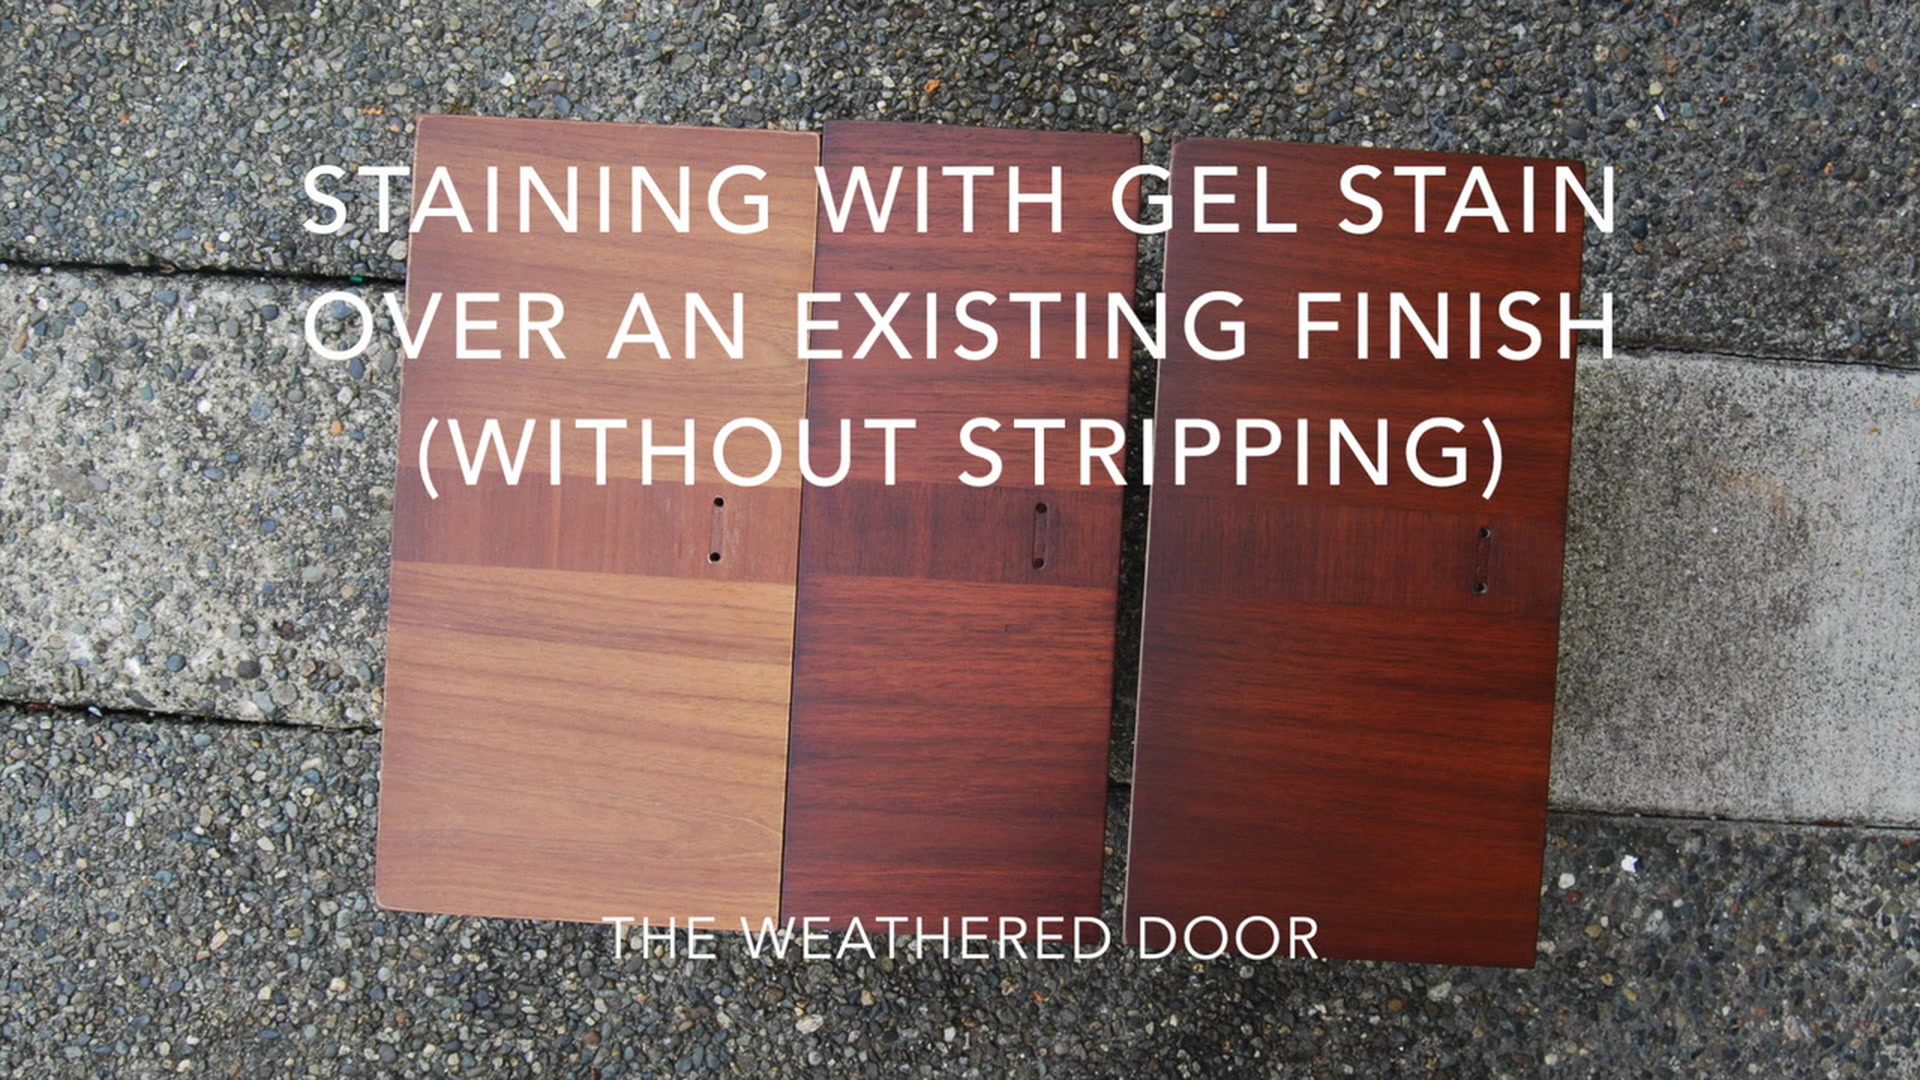 How To Stain With Gel Stain Over An Existing Finish Without